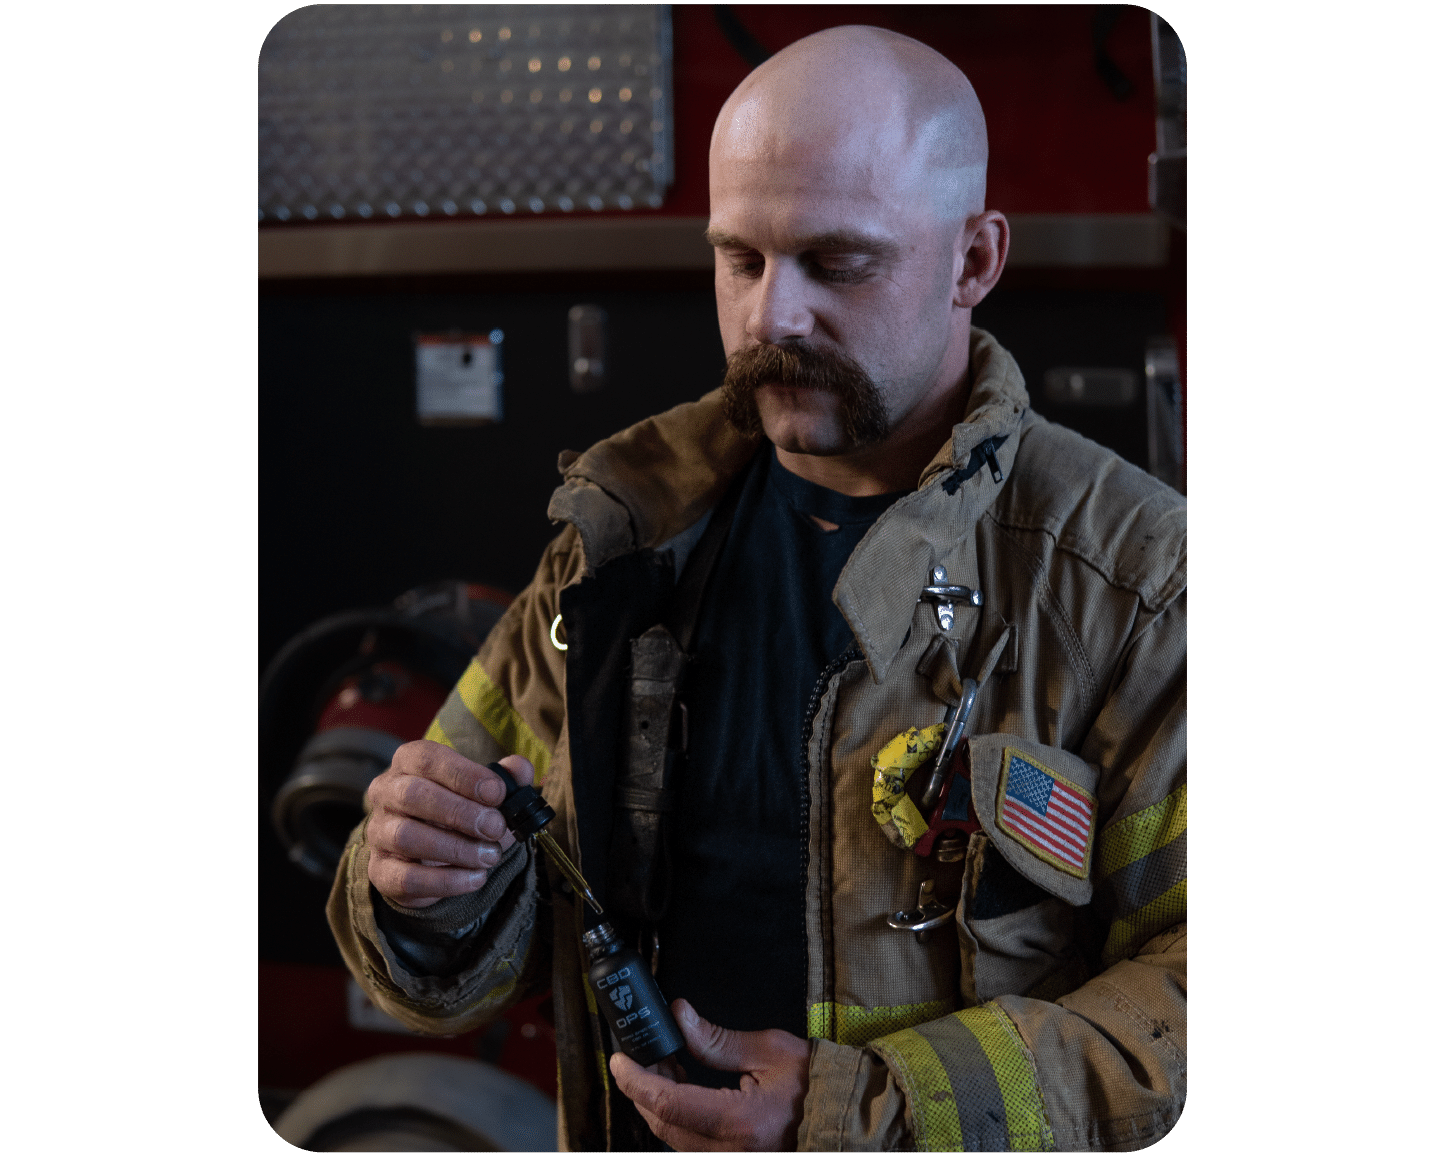 Male firefighter reaping the benefits of CBD for first responders by applying CBD tincture oil.